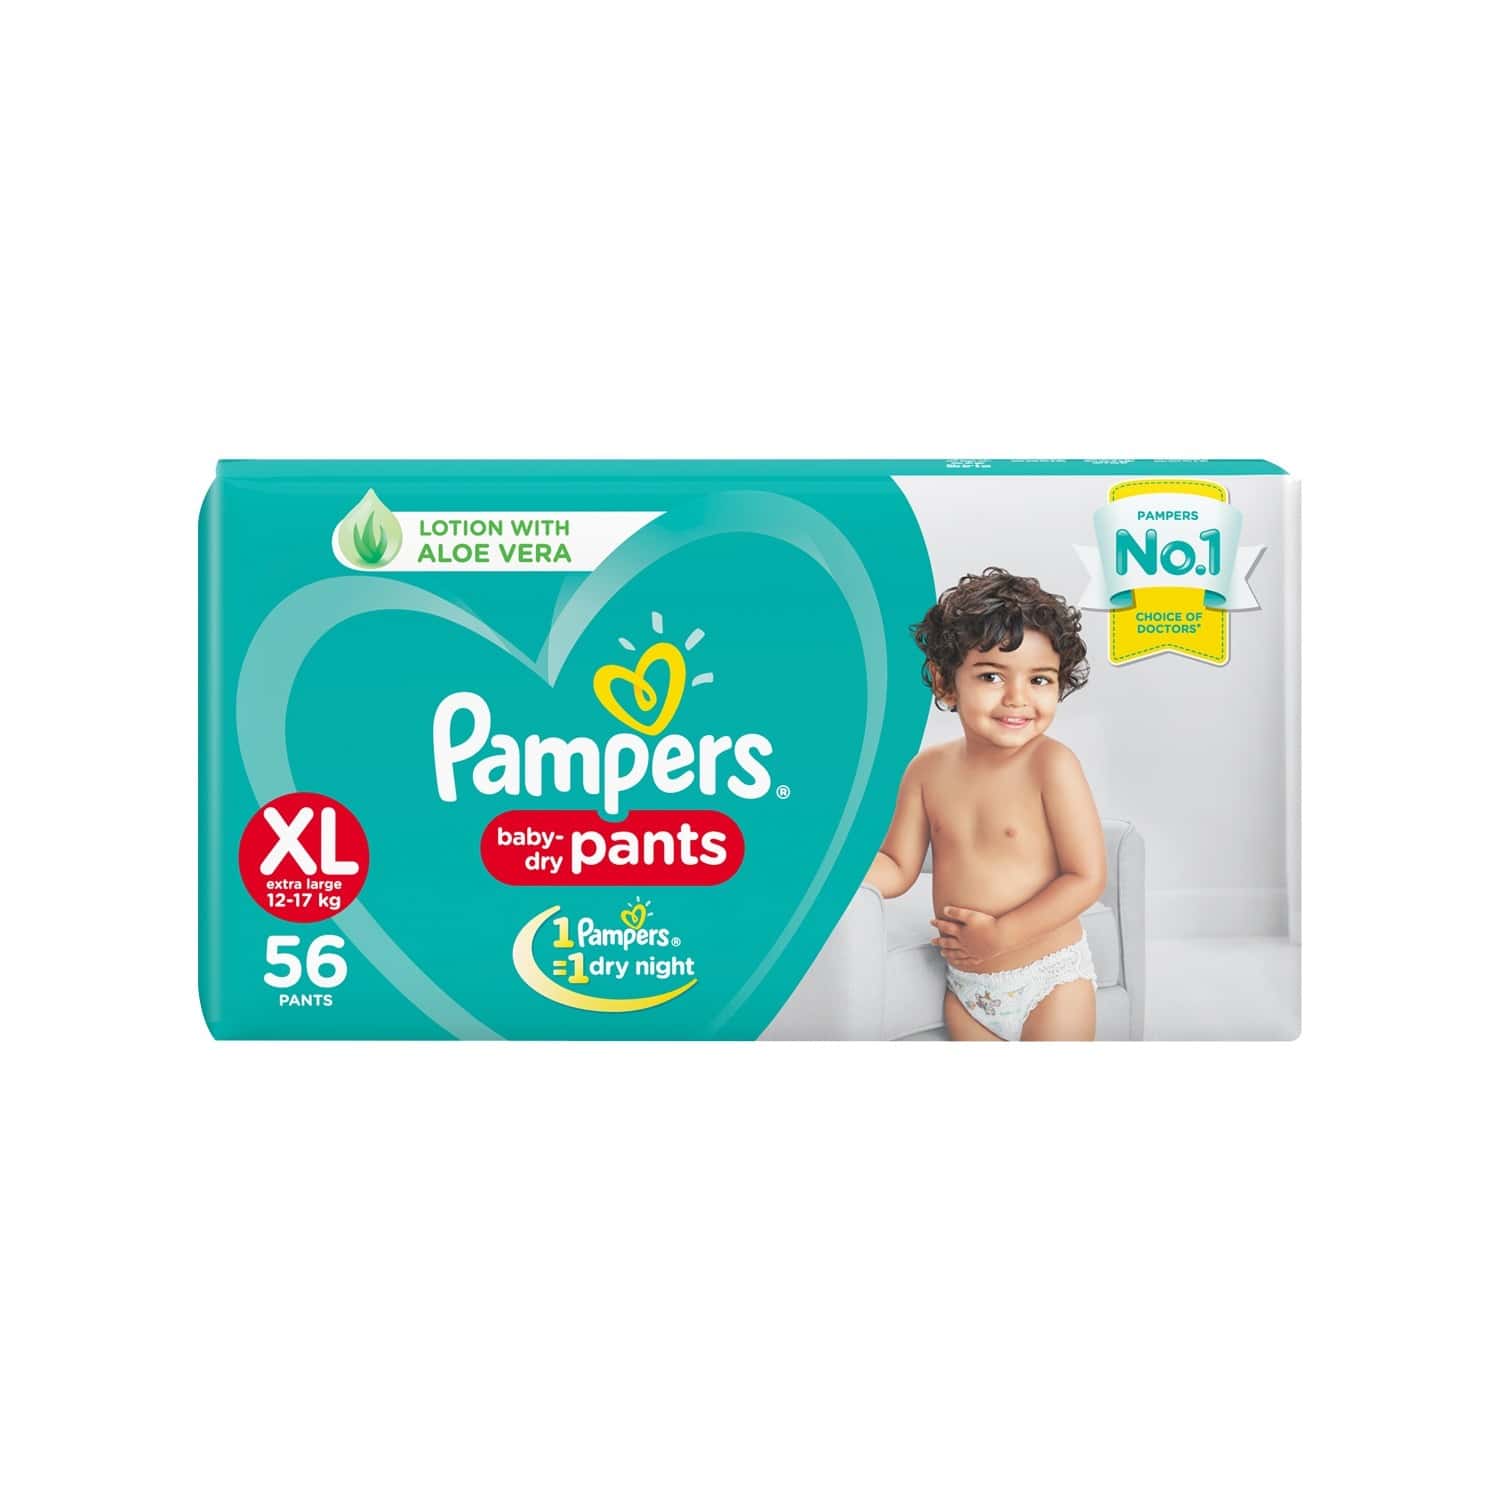 Pampers Pants XL Diapers Pack of 16